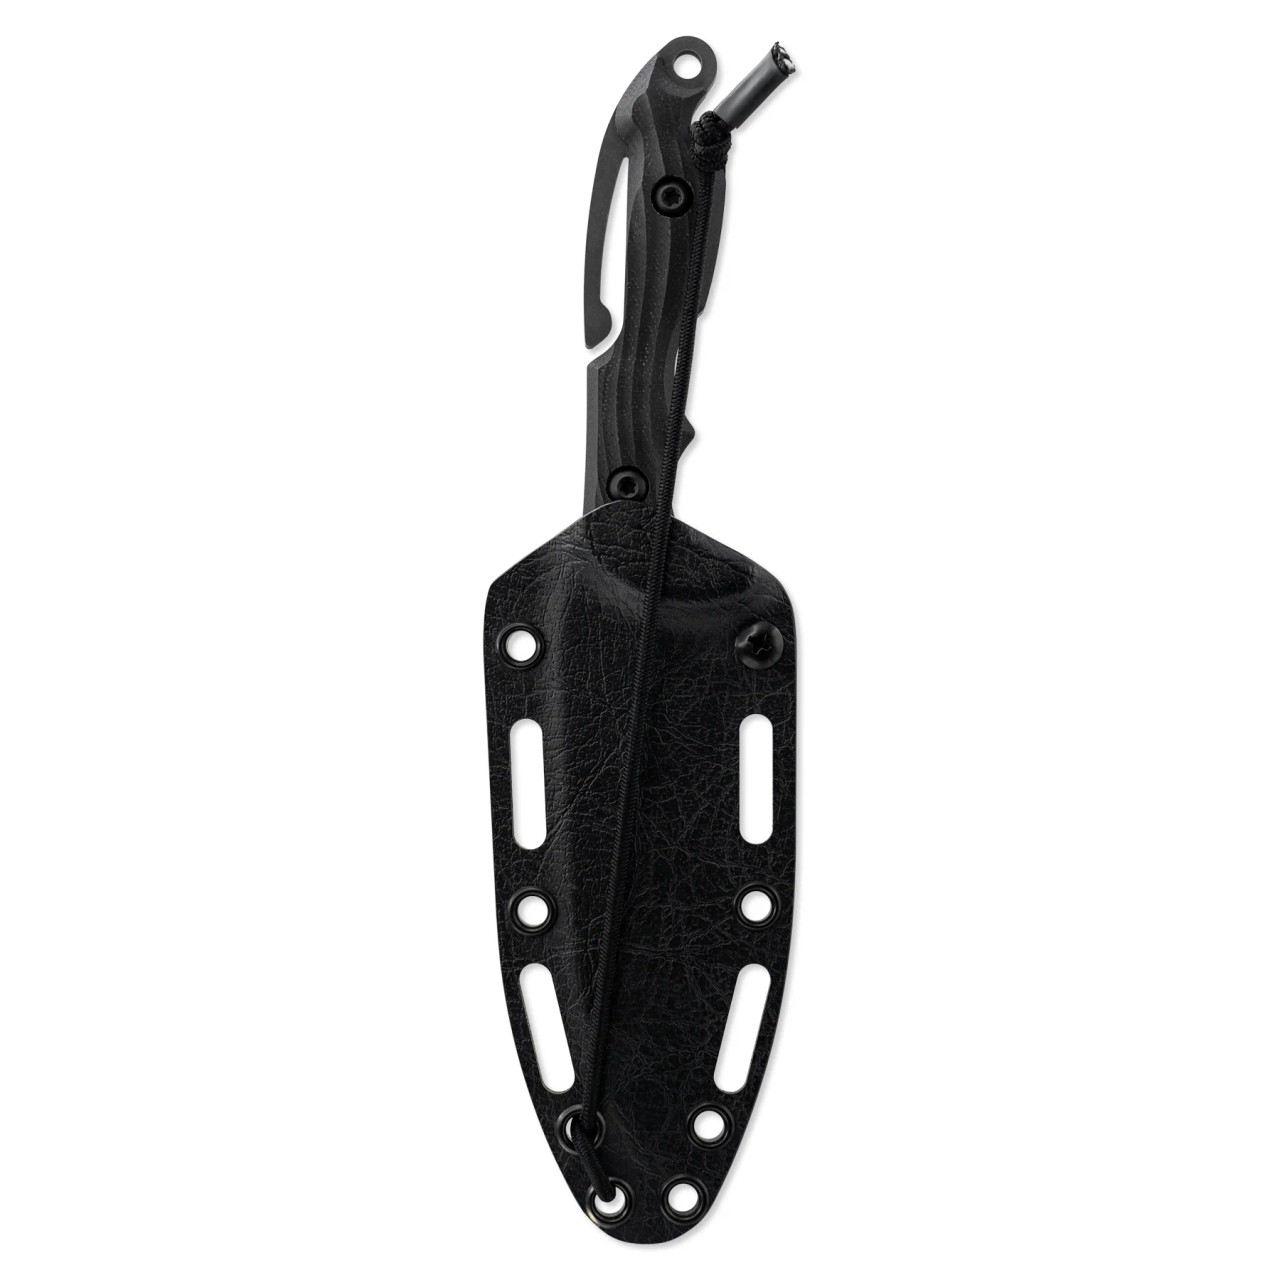 https://cdn11.bigcommerce.com/s-50c7cl/images/stencil/1280x1280/products/6560/30176/MUF-DIVER-CARBON-SHEATH_1800x1800__87012.1690927632.jpg?c=2?imbypass=on